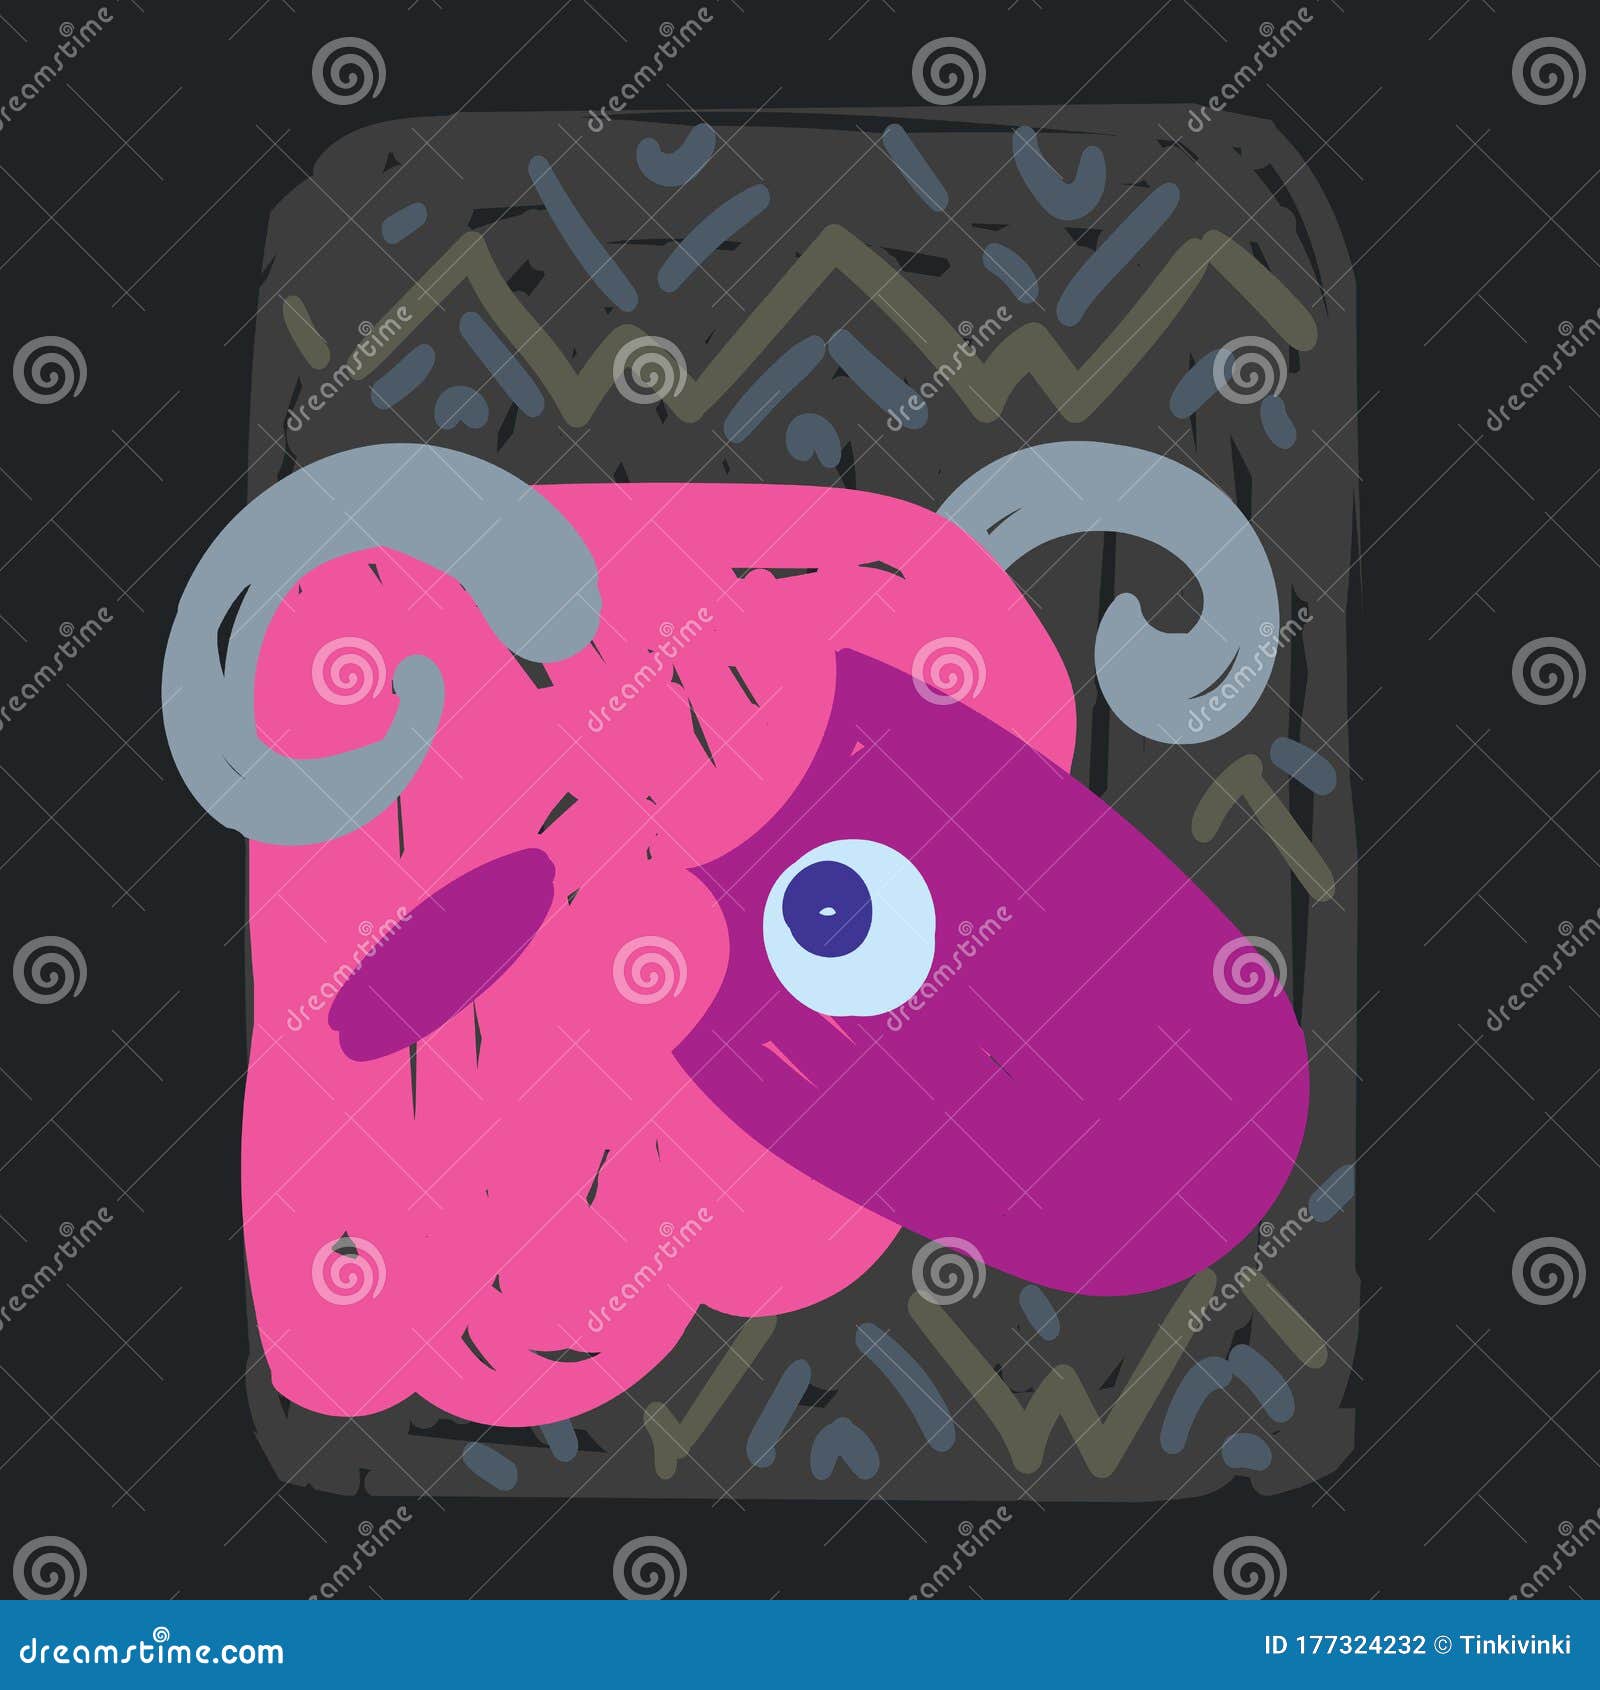 Aries. Funny zodiac sign stock vector. Illustration of colorful - 177324232